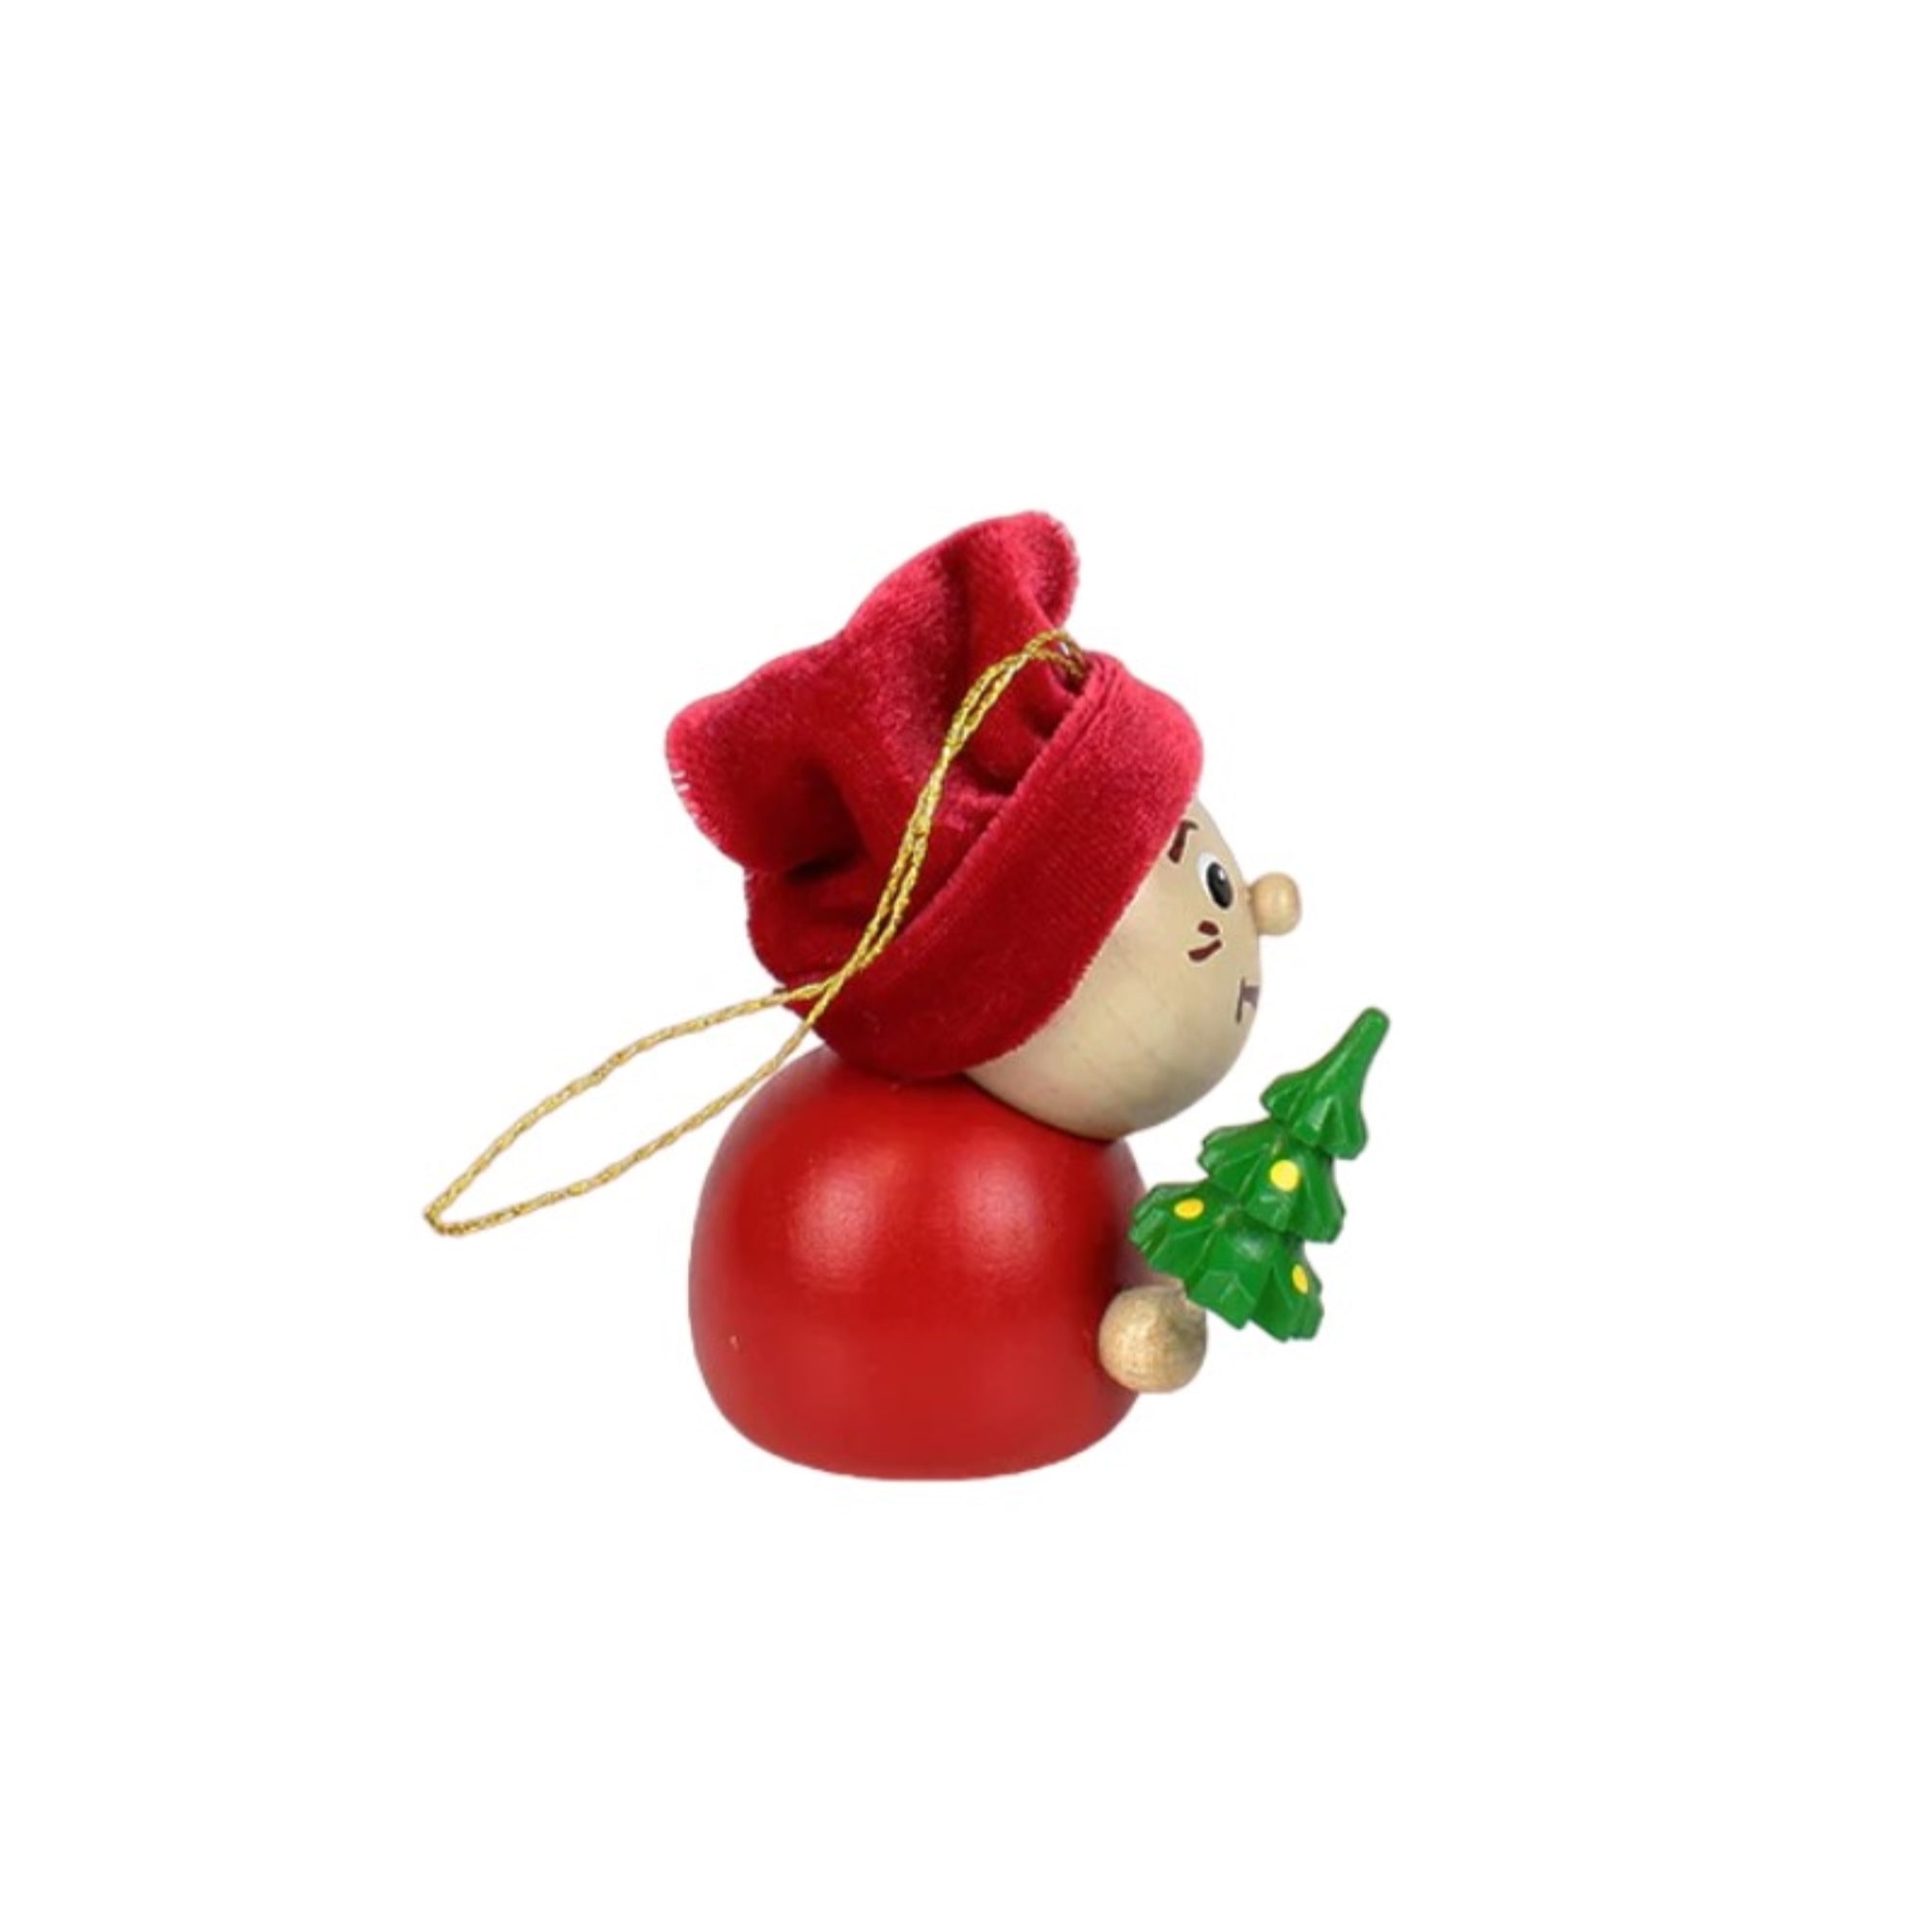 Steinbach Day One Pear Tree Ornament, 12 Days of Christmas, 3.5"